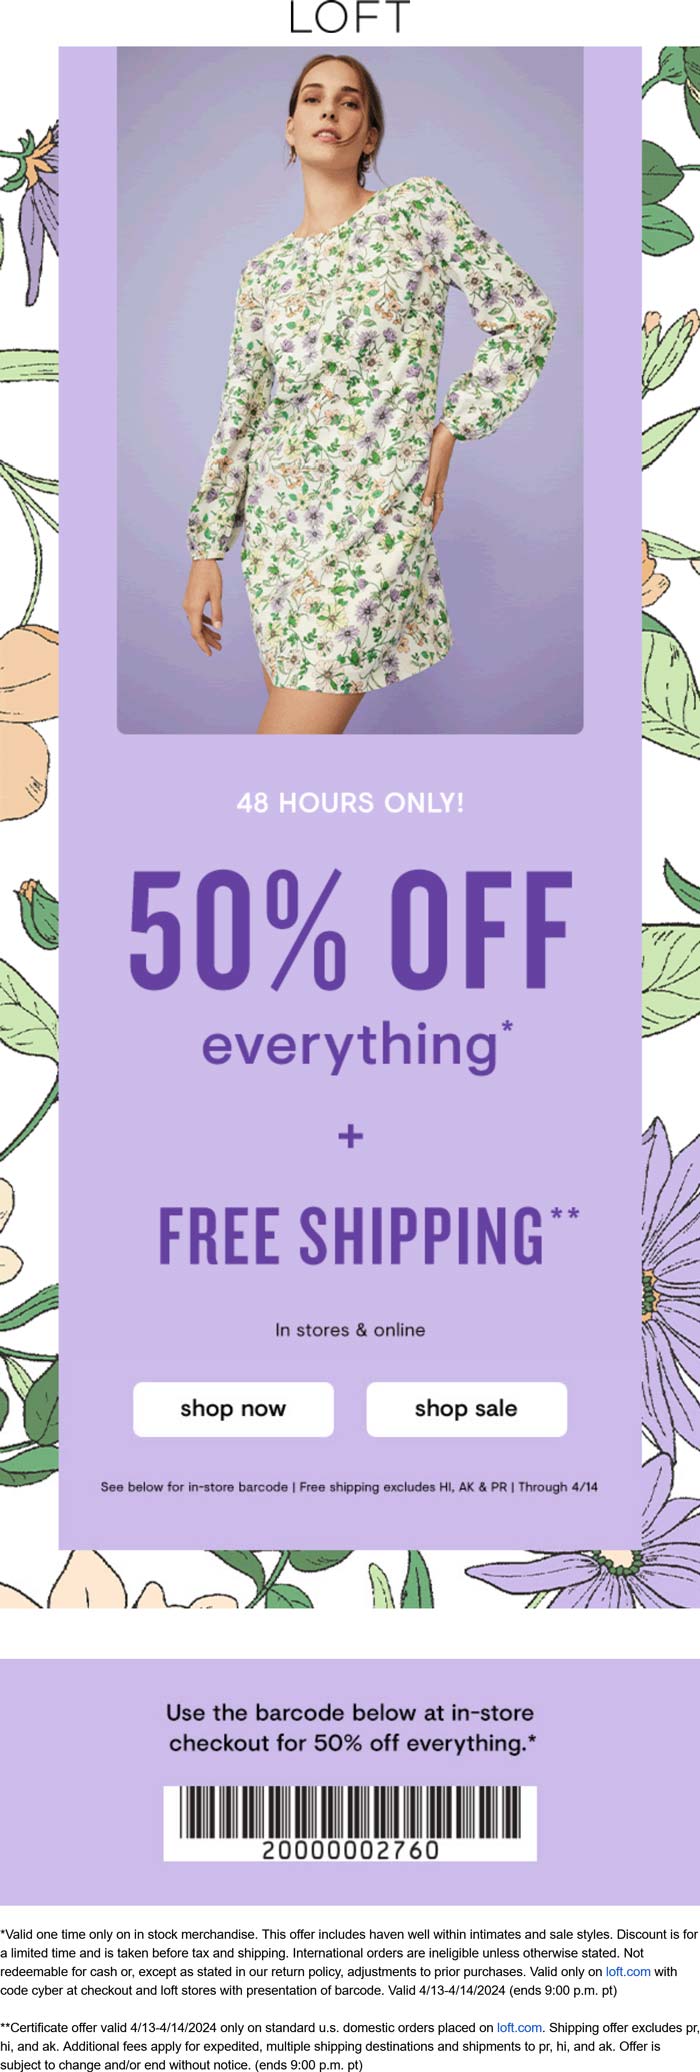 LOFT stores Coupon  50% off everything at LOFT, ditto online #loft 